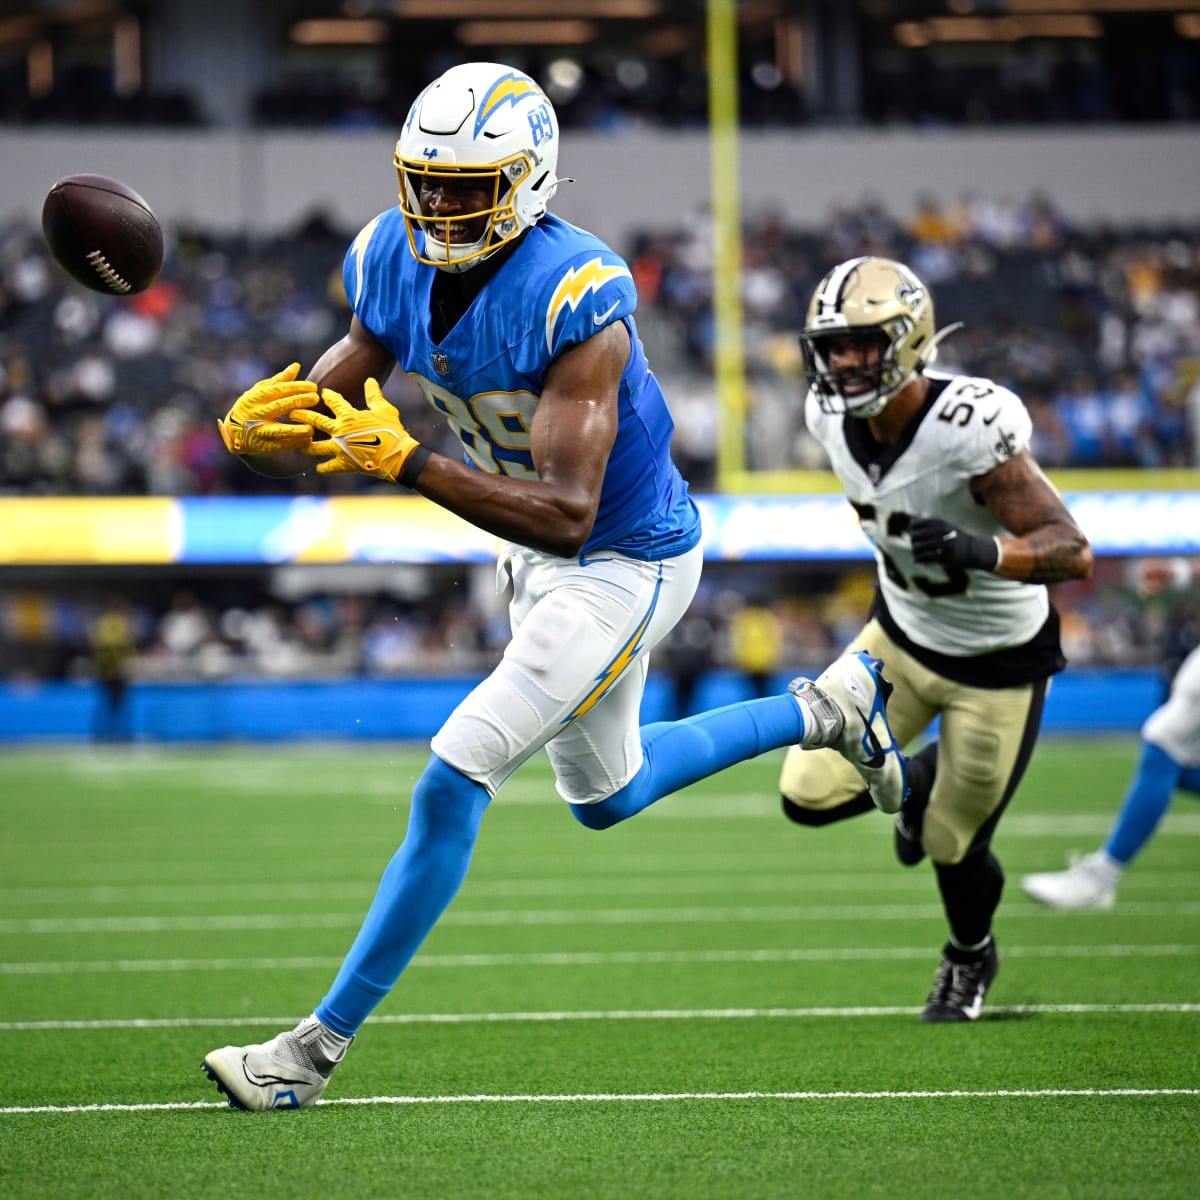 Chargers' Donald Parham is showing to be elite end zone target for